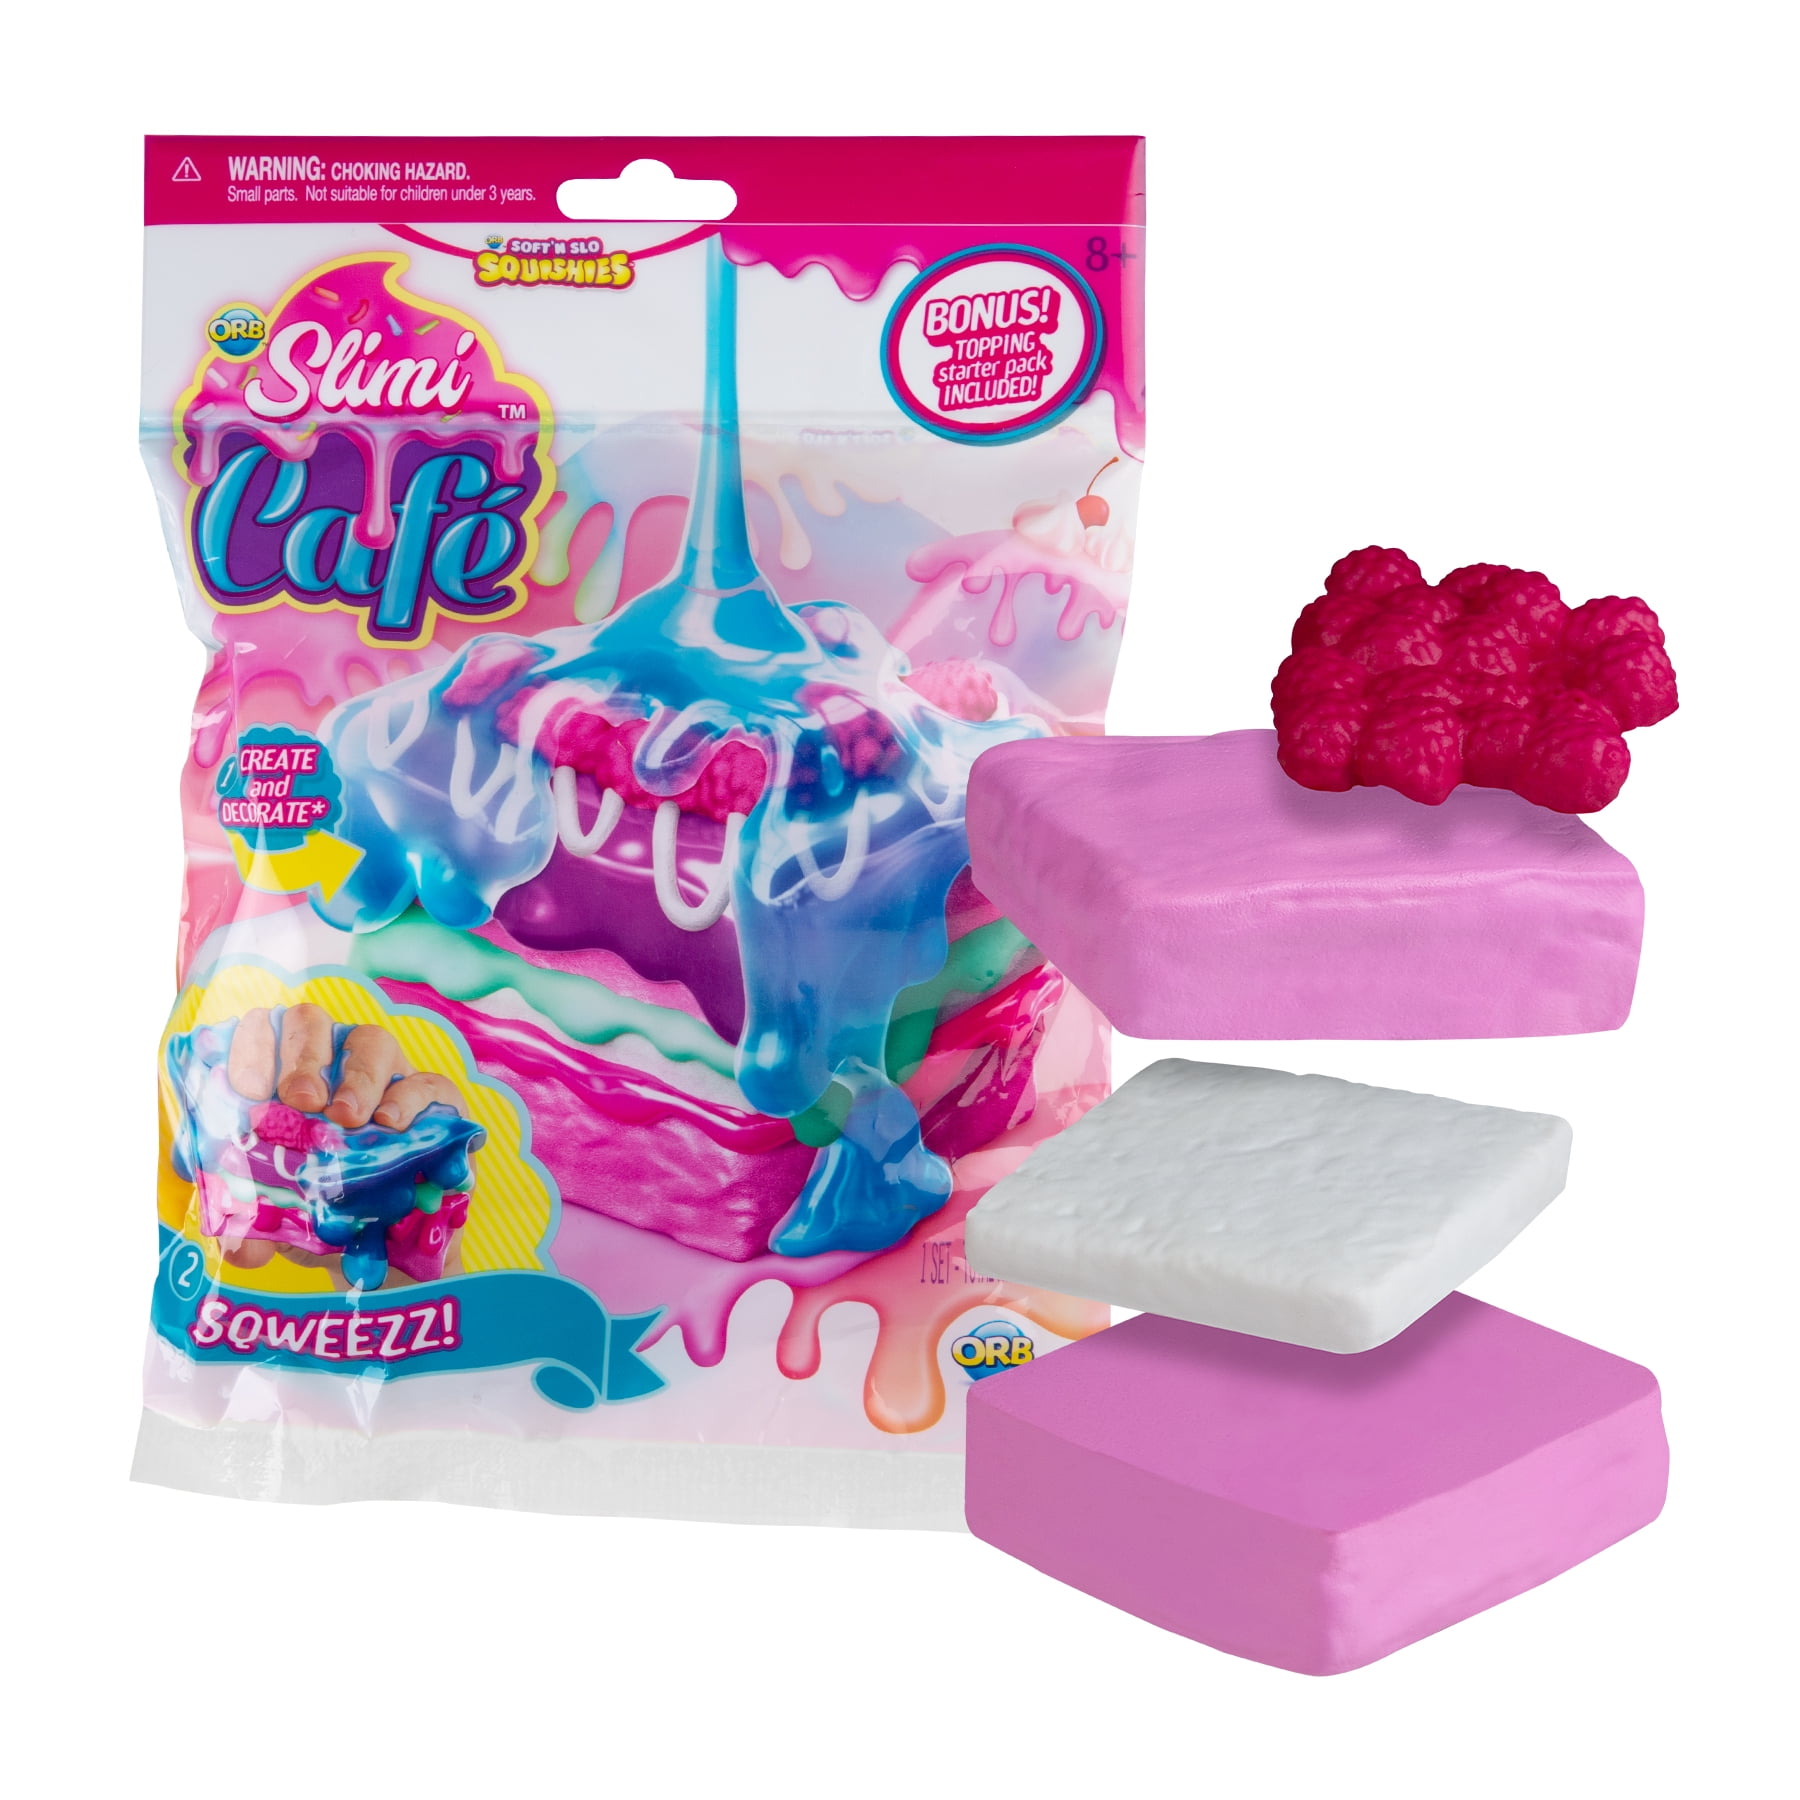 ORB Slimi Café Soft N Slo Squishies Lattice Topped Pie Squeeze Create Decorate for sale online 